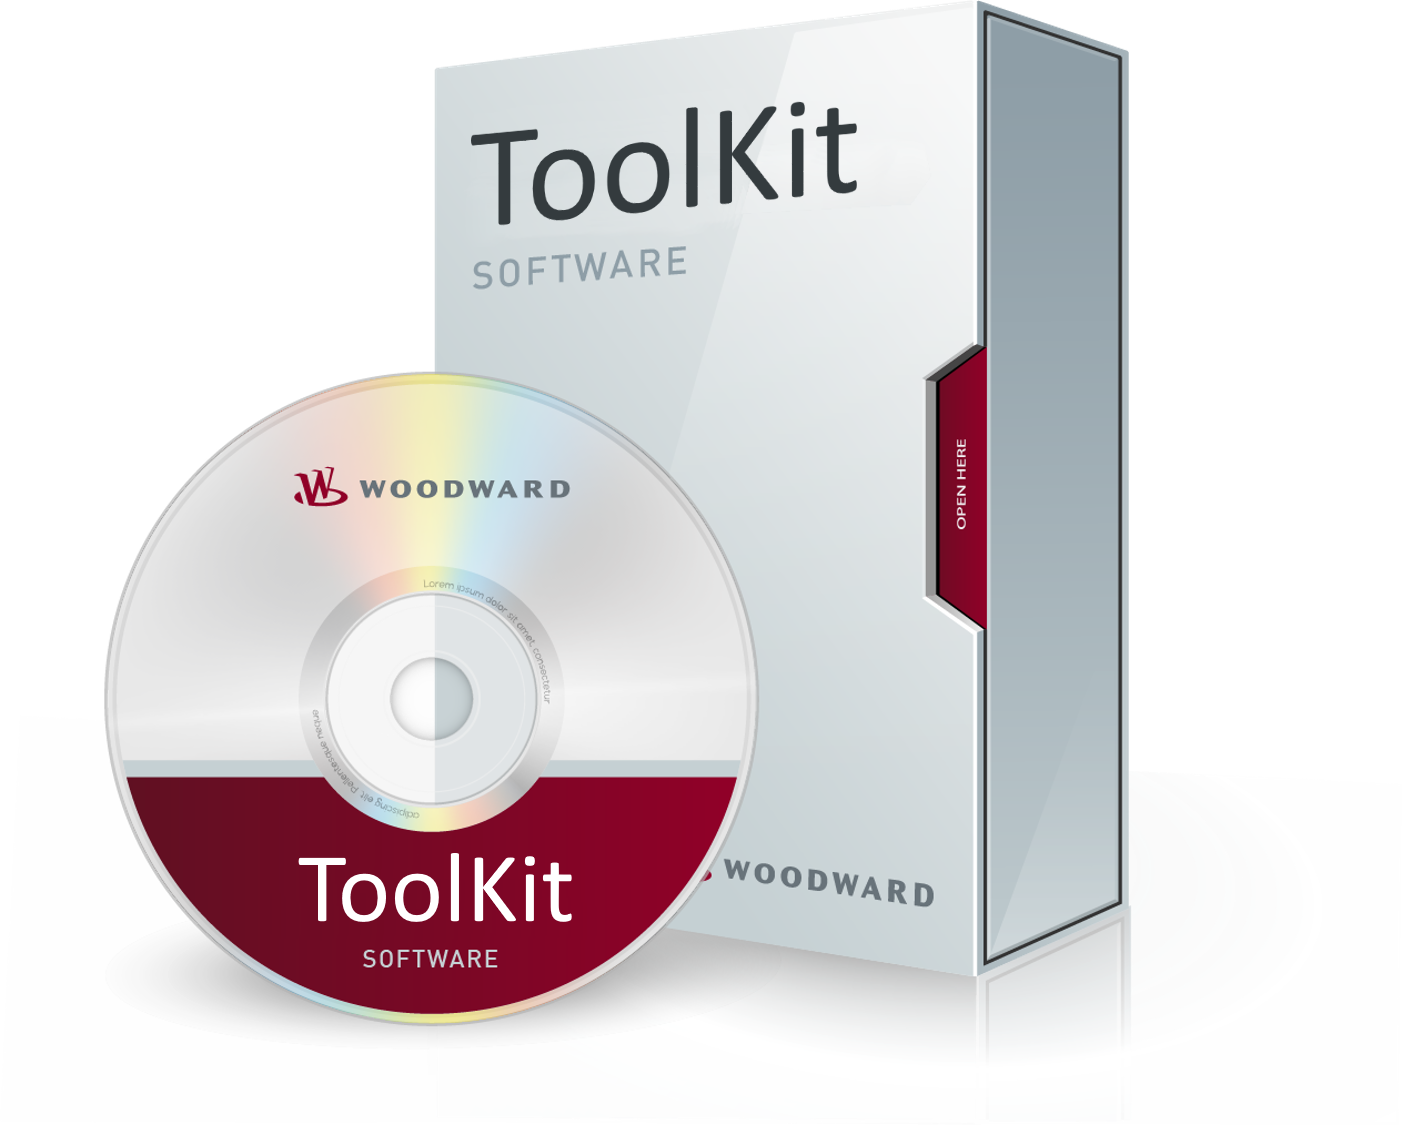 Toolkit software